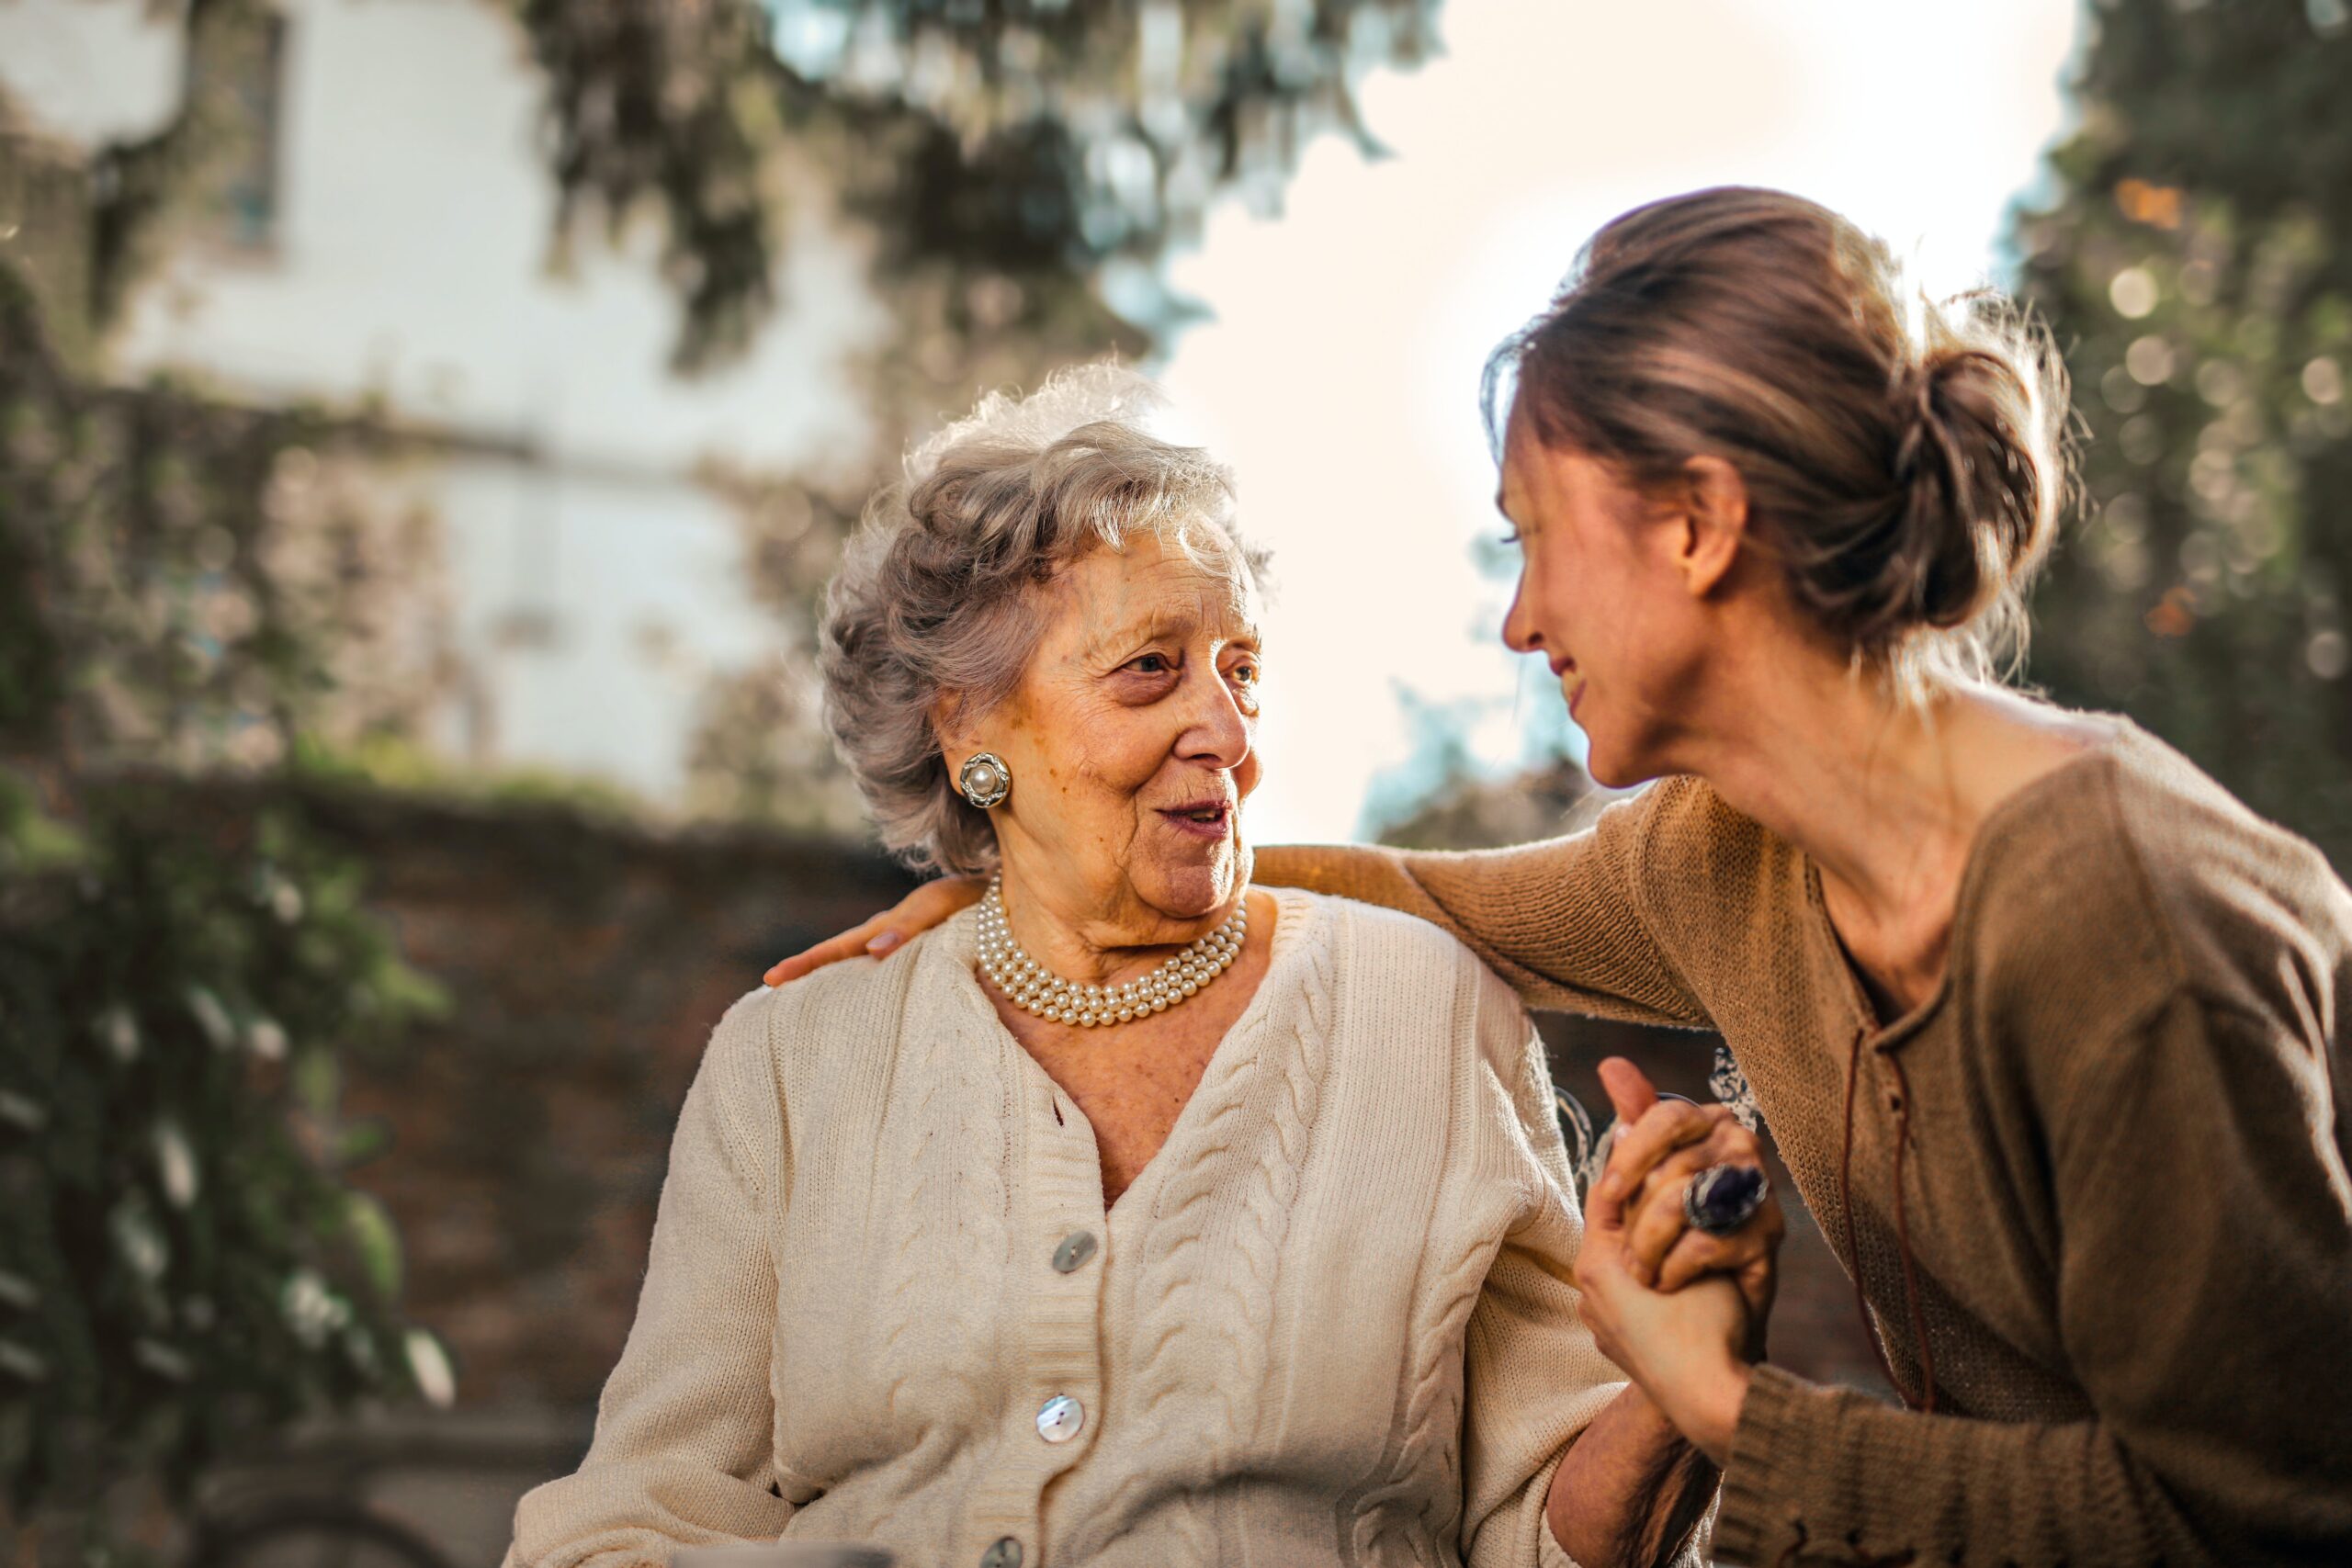 The Risk Of Hiring A Private Caregiver Versus Going Through A Home Care Agency